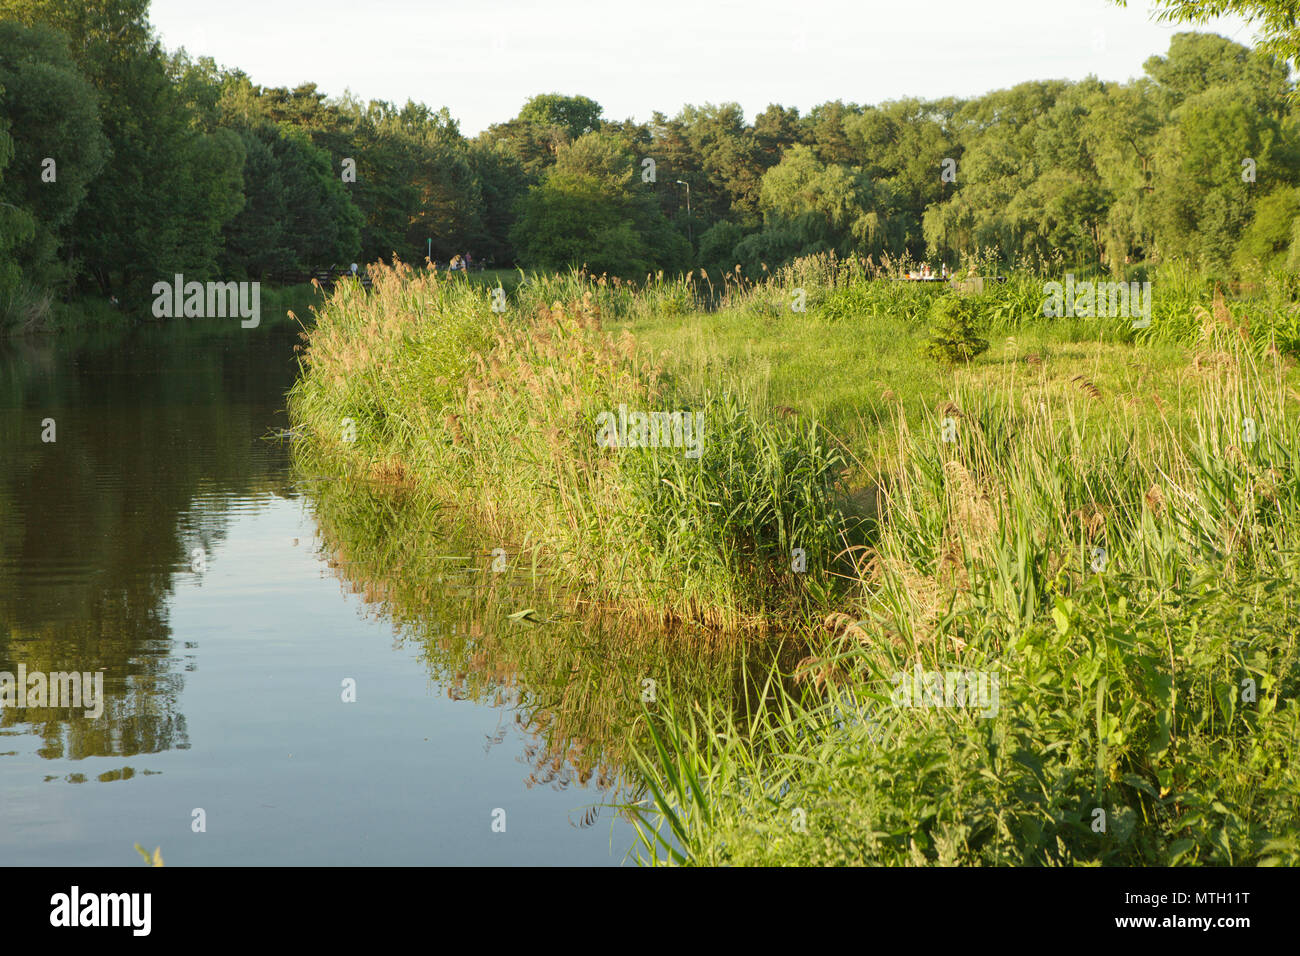 reeds, grass and trees at a bank of a pond Stock Photo